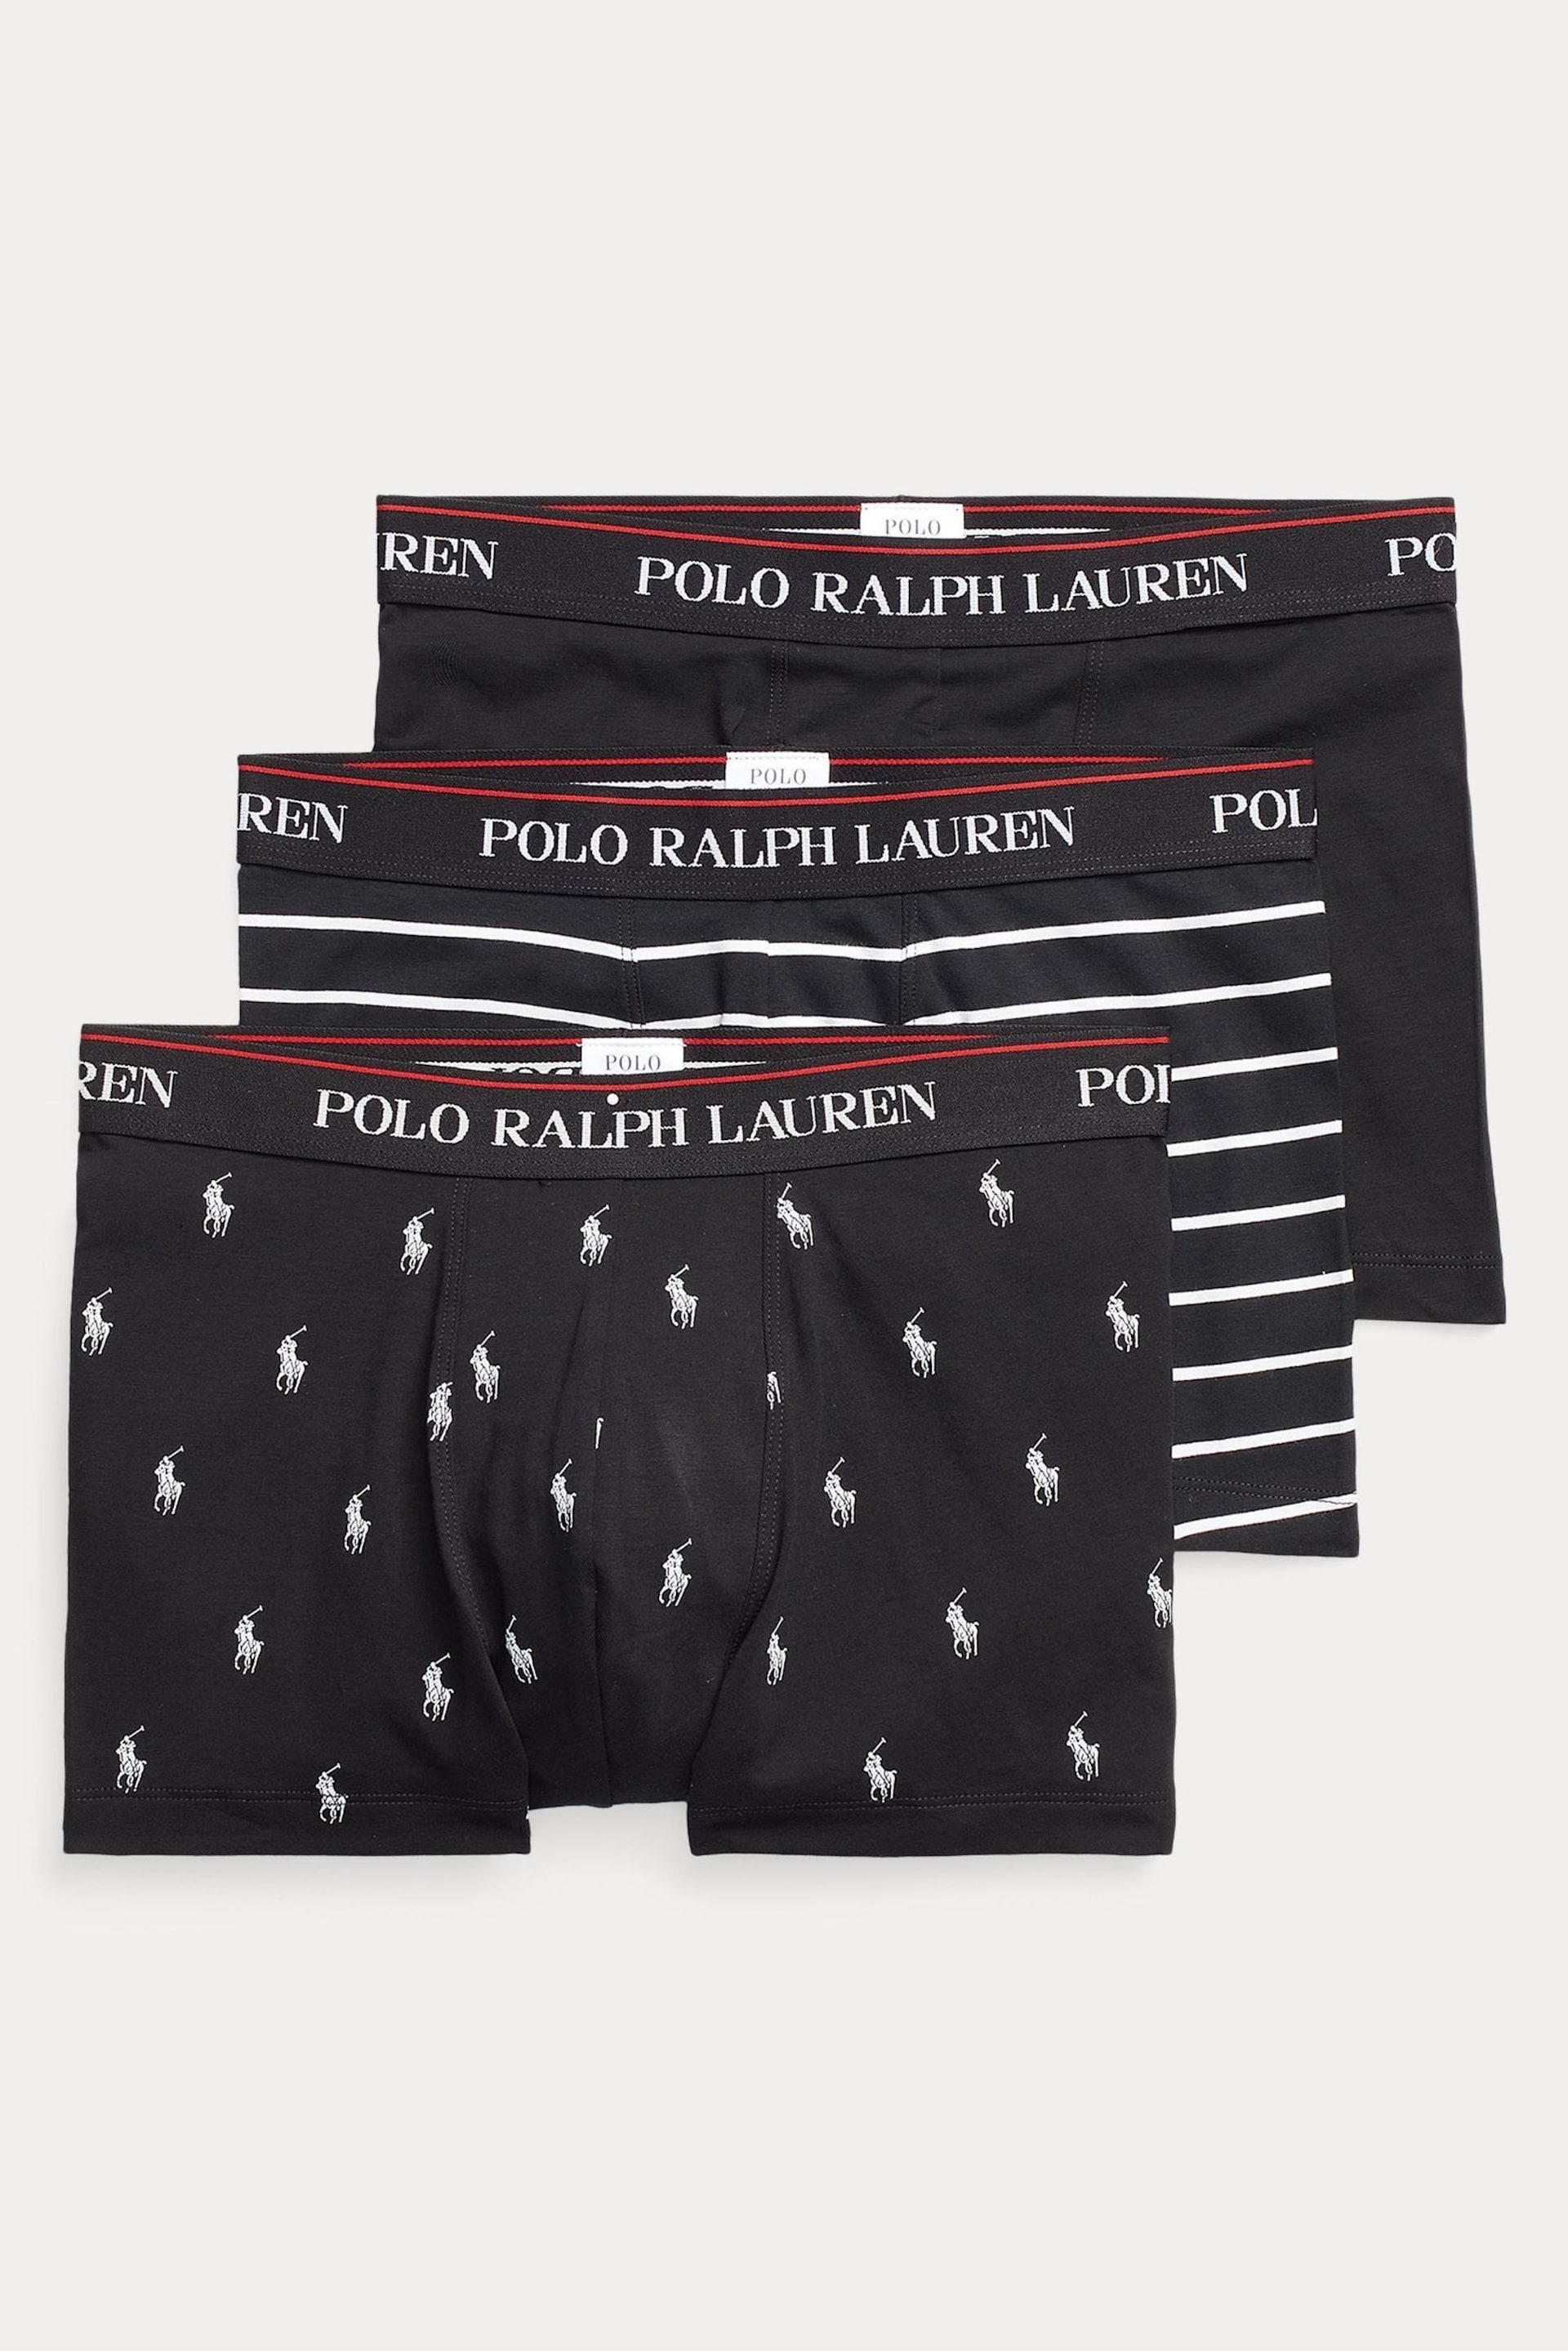 Polo Ralph Lauren Classic Stretch-Cotton Short 3-Pack - Image 1 of 6